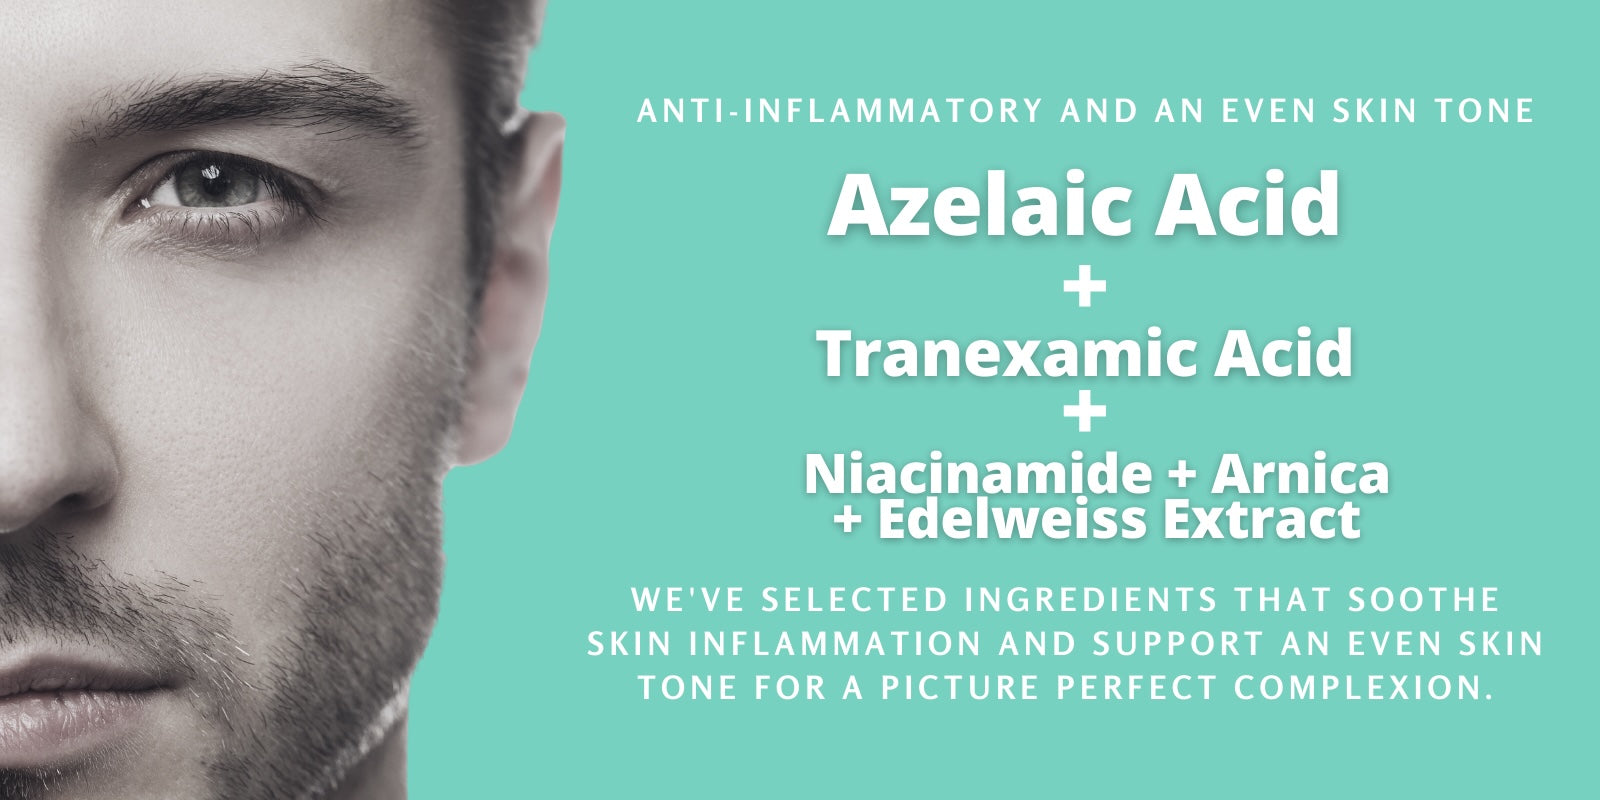 Azelaic acid, tranexamic acid, niacinamide, arnica, edelweiss extract. skincare ingredients that calm redness and reduce brown spots